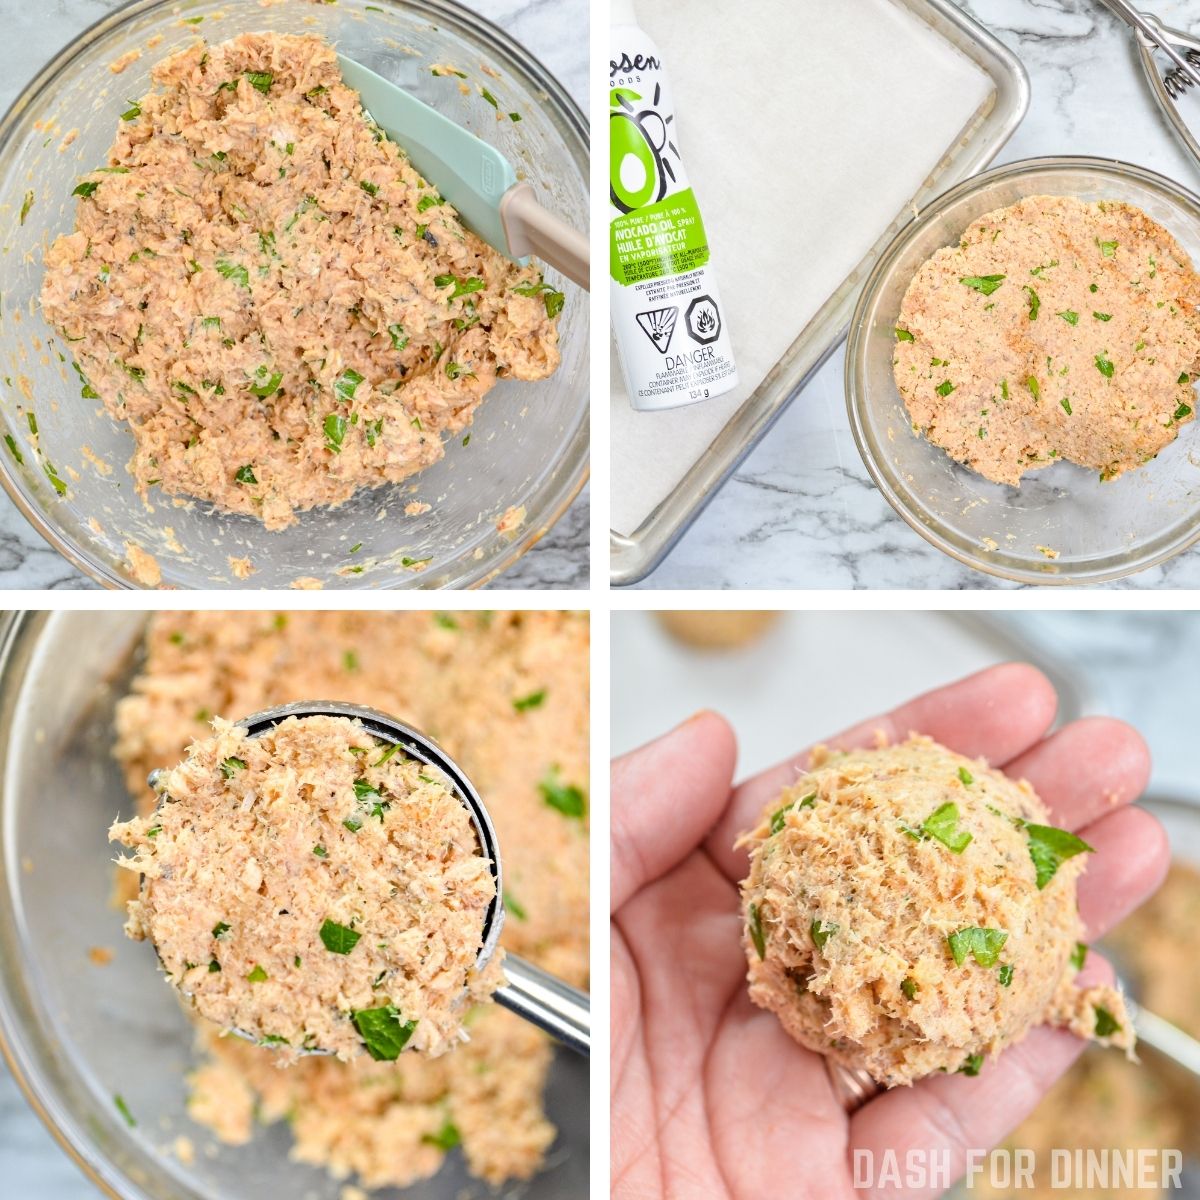 How to make homemade canned salmon patties.